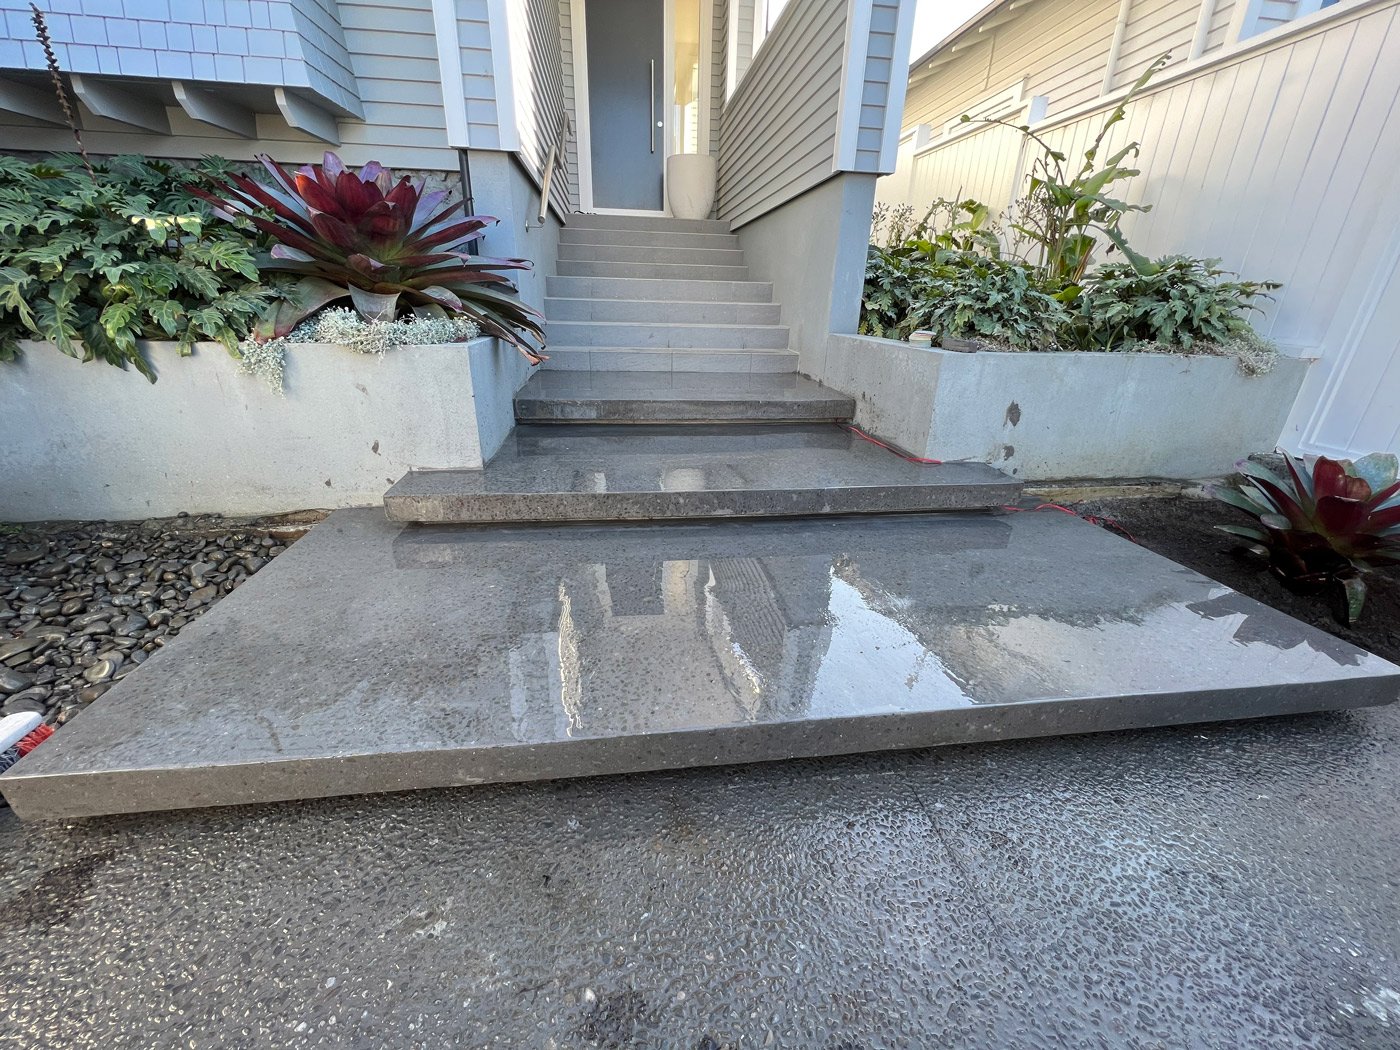 Freshly cleaned floating concrete front steps to a house